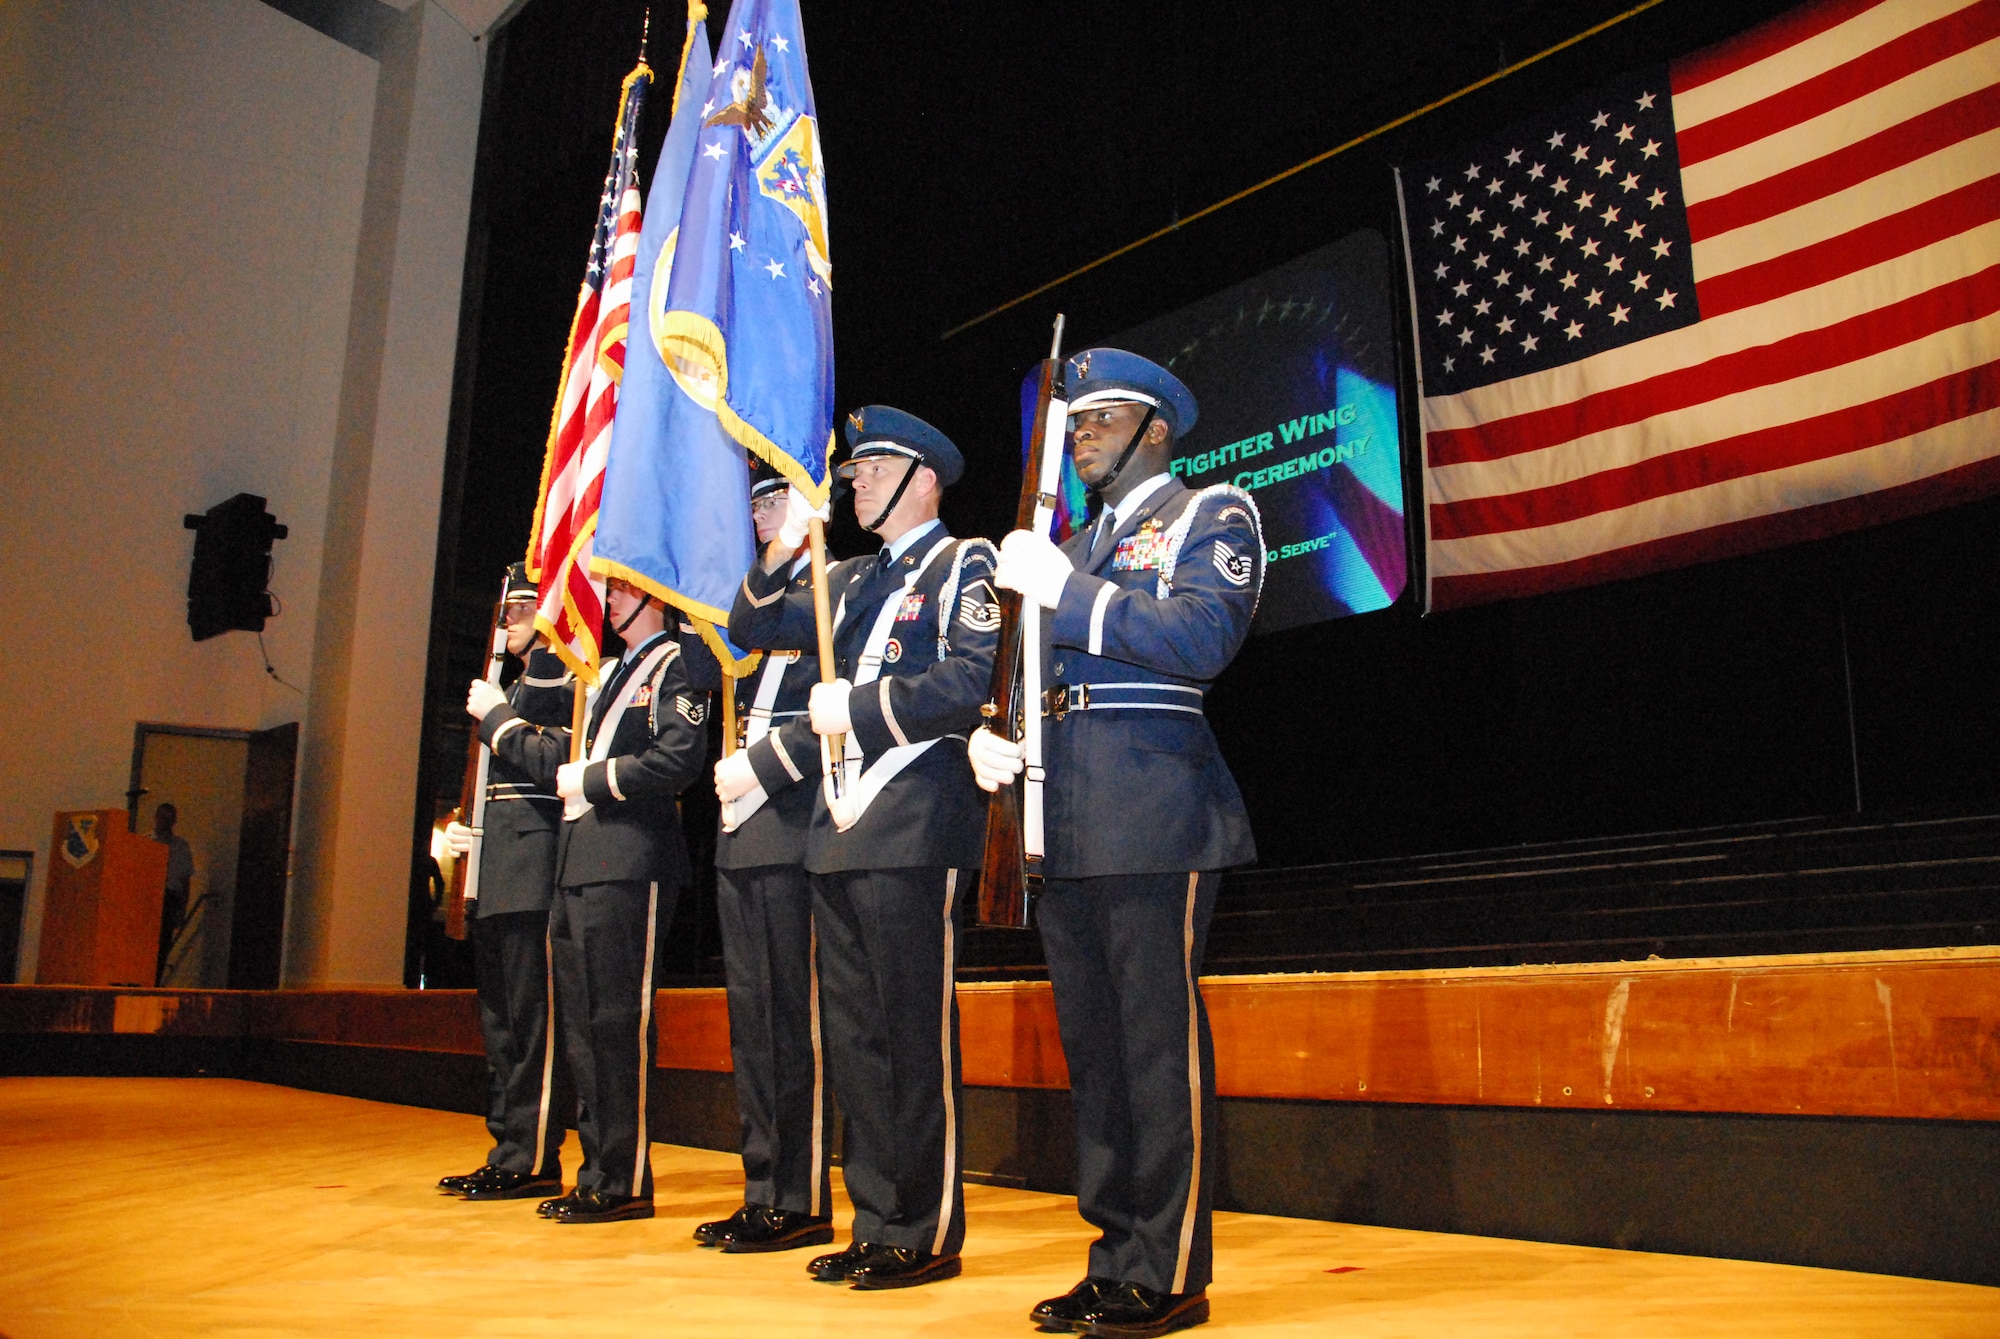 The 148th Fighter Wing Honor Guard posts the colors during a deployment ceremony in Duluth, Minn. Nov. 2, 2008.  Approximately 300 148th Fighter Wing members will deploy overseas in support of Operation Iraqi Freedom and/or Operation Enduring Freedom between Sept 2008 and Jan 2009. (U.S. Air Force photo by TSgt Amie Dahl) (Released)